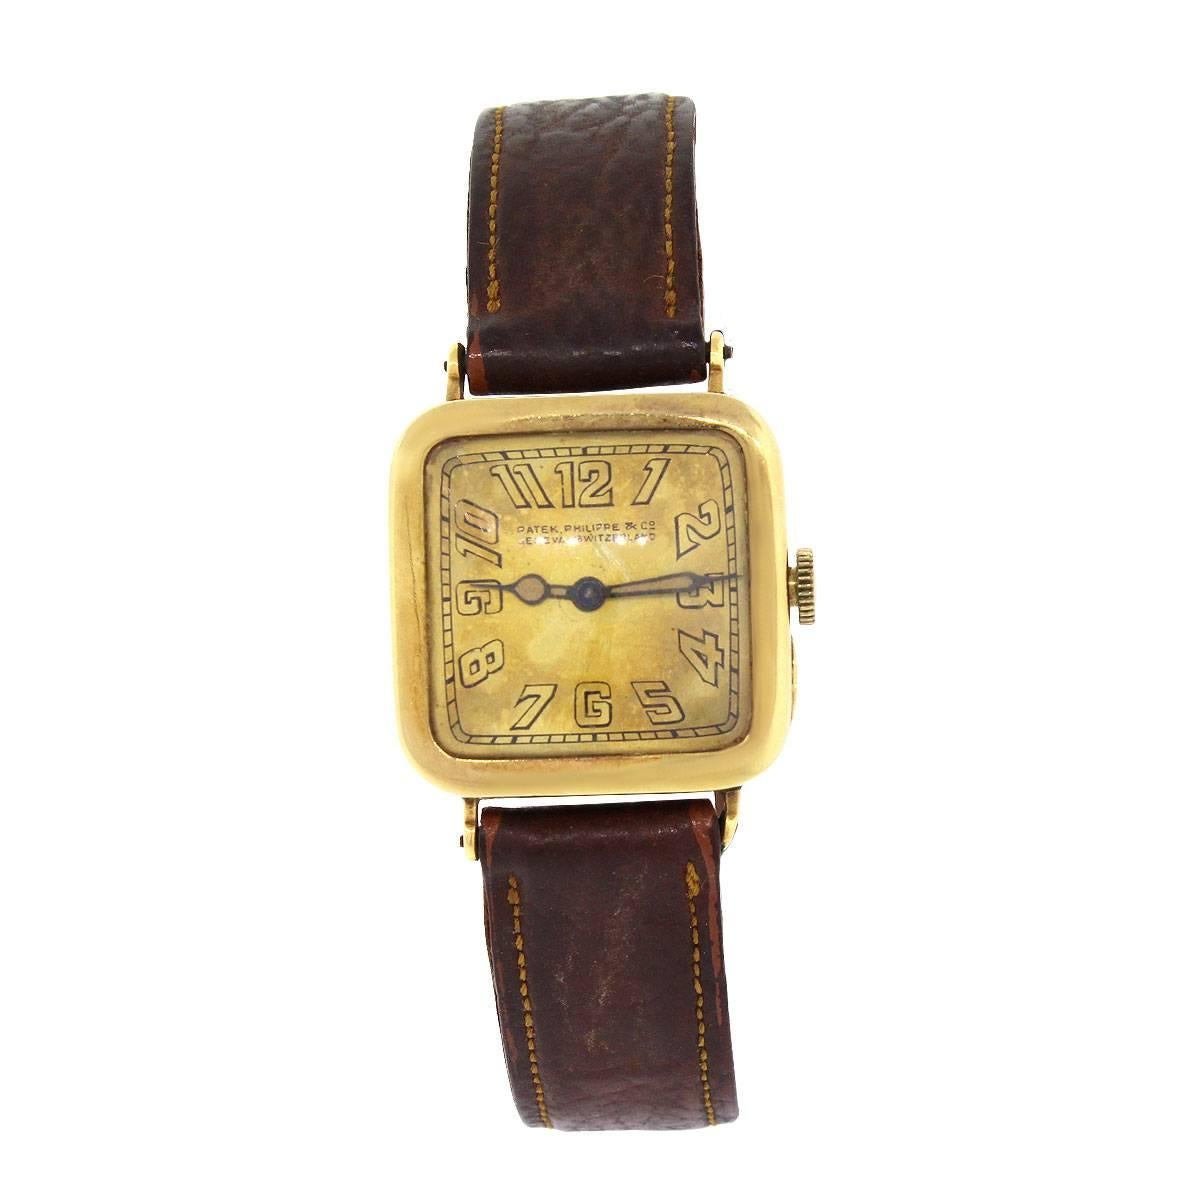 Brand: Patek Philippe
Model: Circa 1920
Case Material: 18k Yellow Gold
Case Diameter: 25mm
Crystal: Plastic
Bezel: 18k yellow gold
Dial: champagne arabic dial with gold/black hands
Bracelet: Adjustable Brown leather strap
Size: Will fit a 6.5″